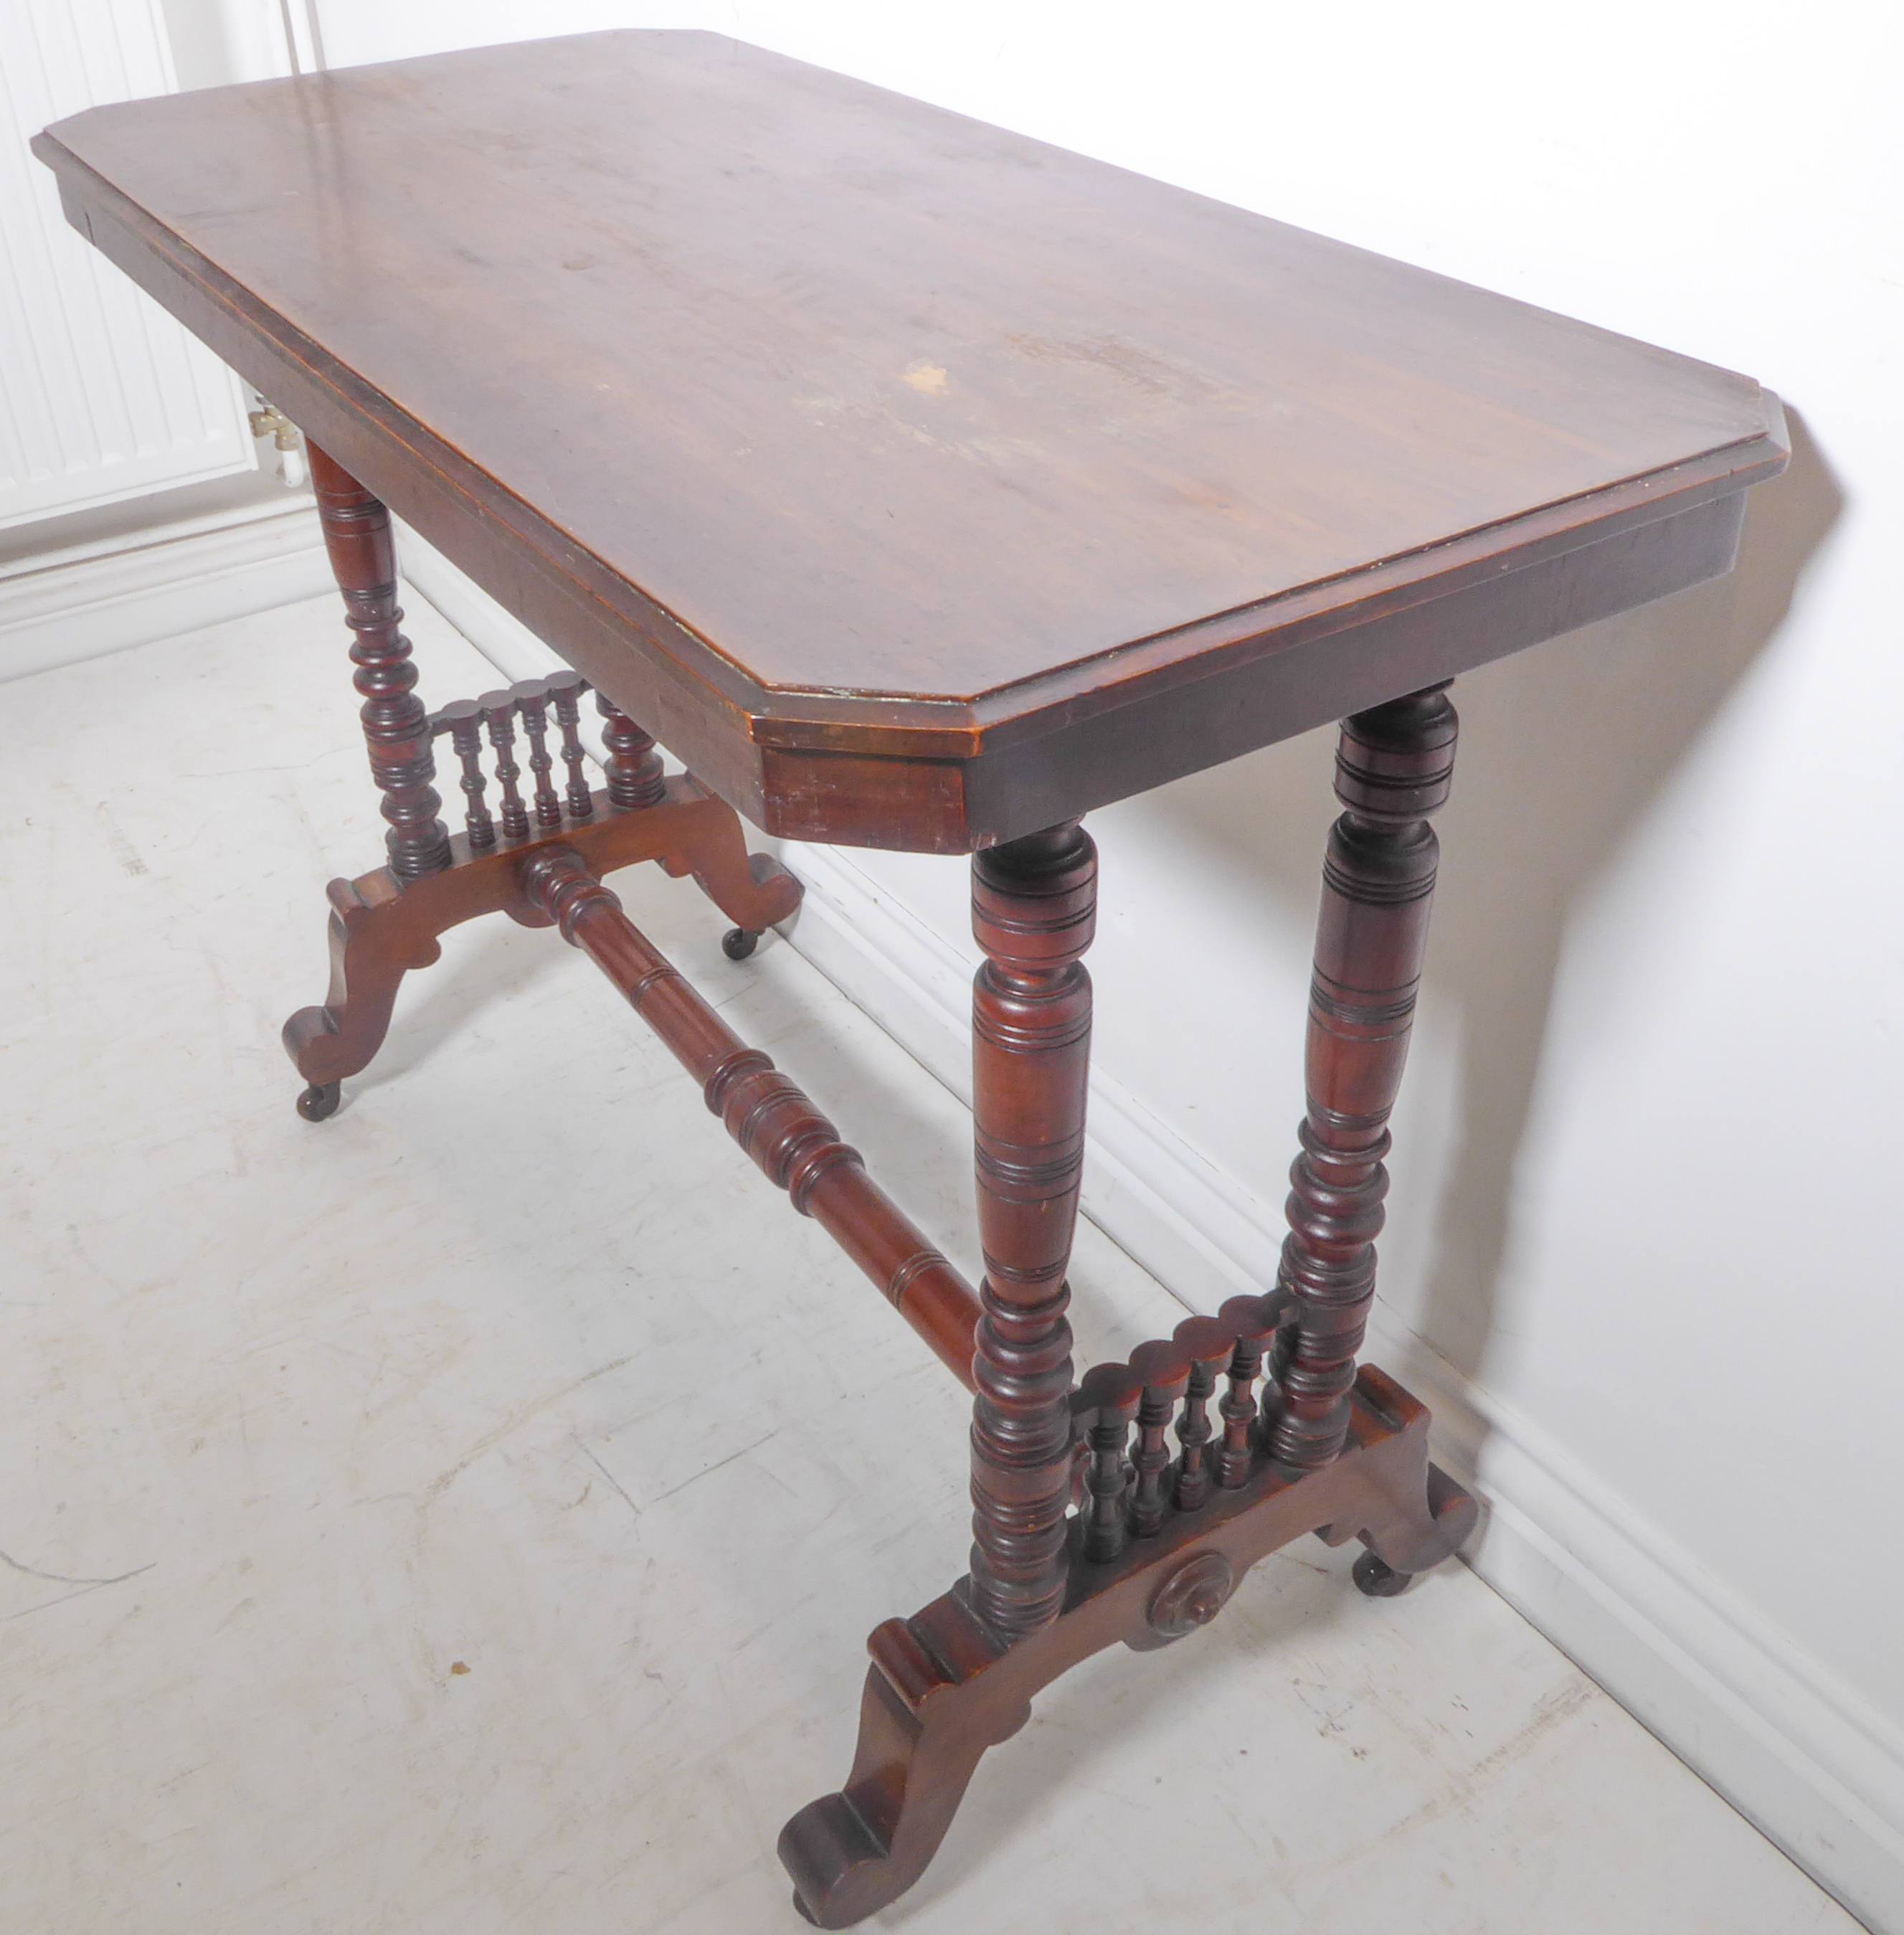 An Edwardian mahogany occasional table – rectangular form with canted corners and four turned